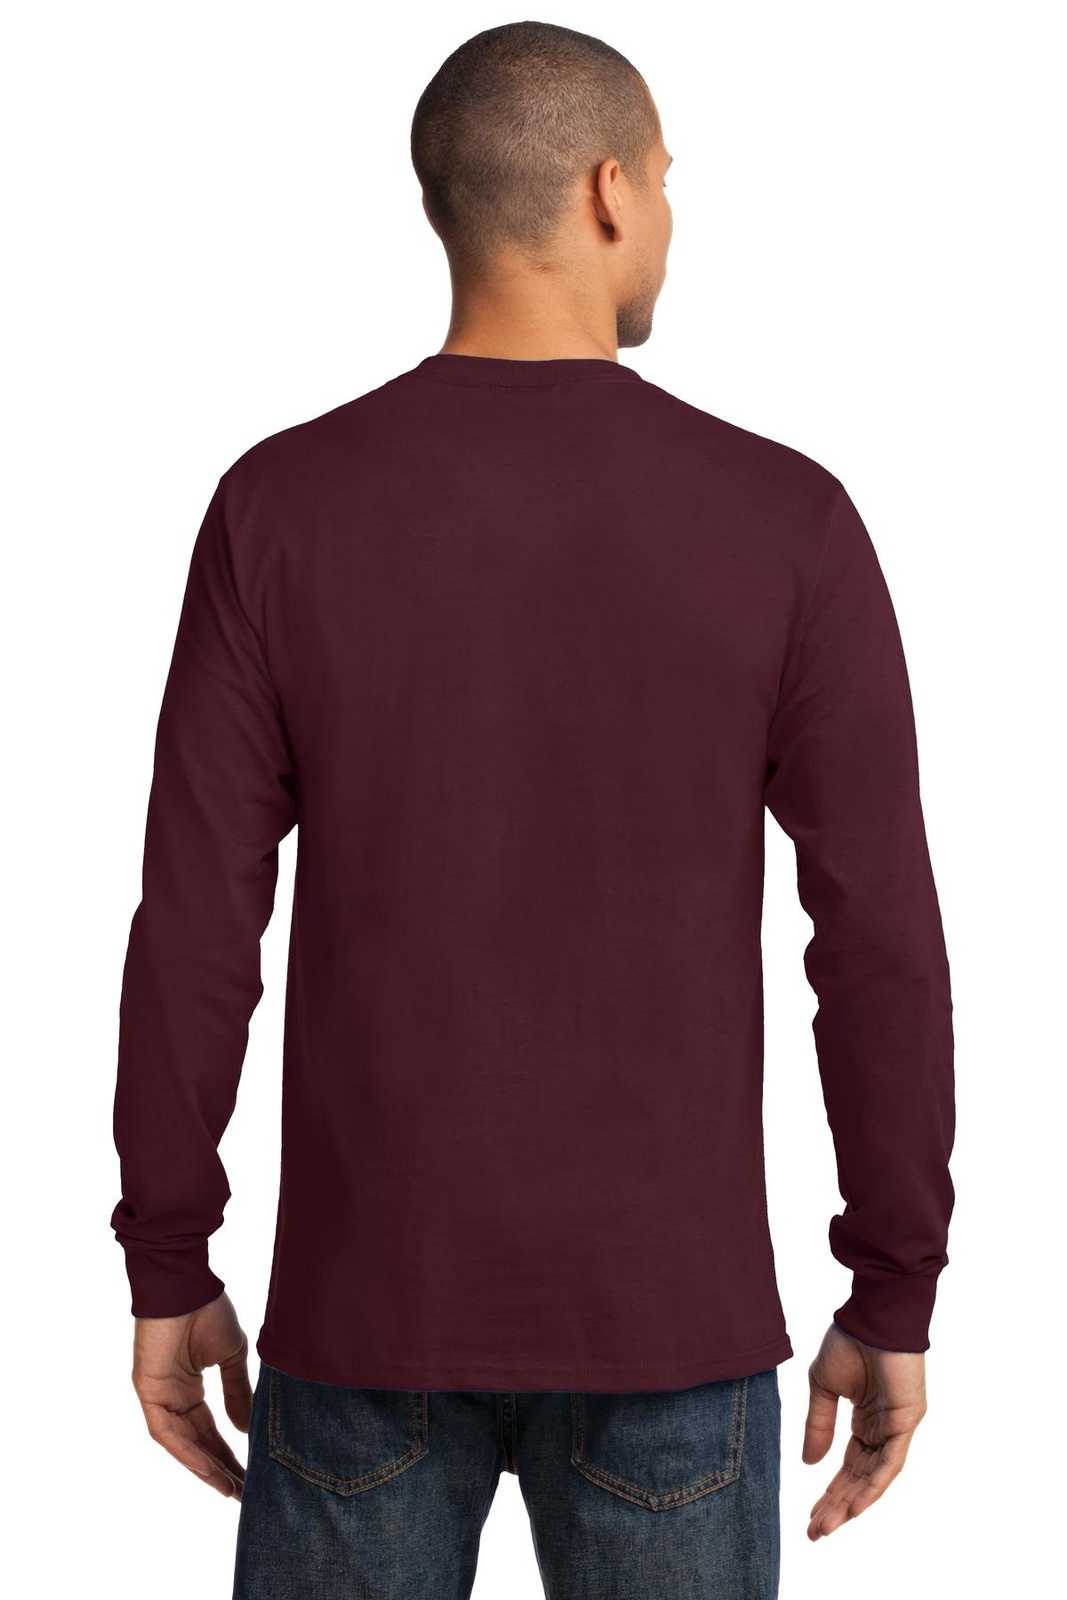 Port & Company PC61LST Tall Long Sleeve Essential Tee - Athletic Maroon - HIT a Double - 1